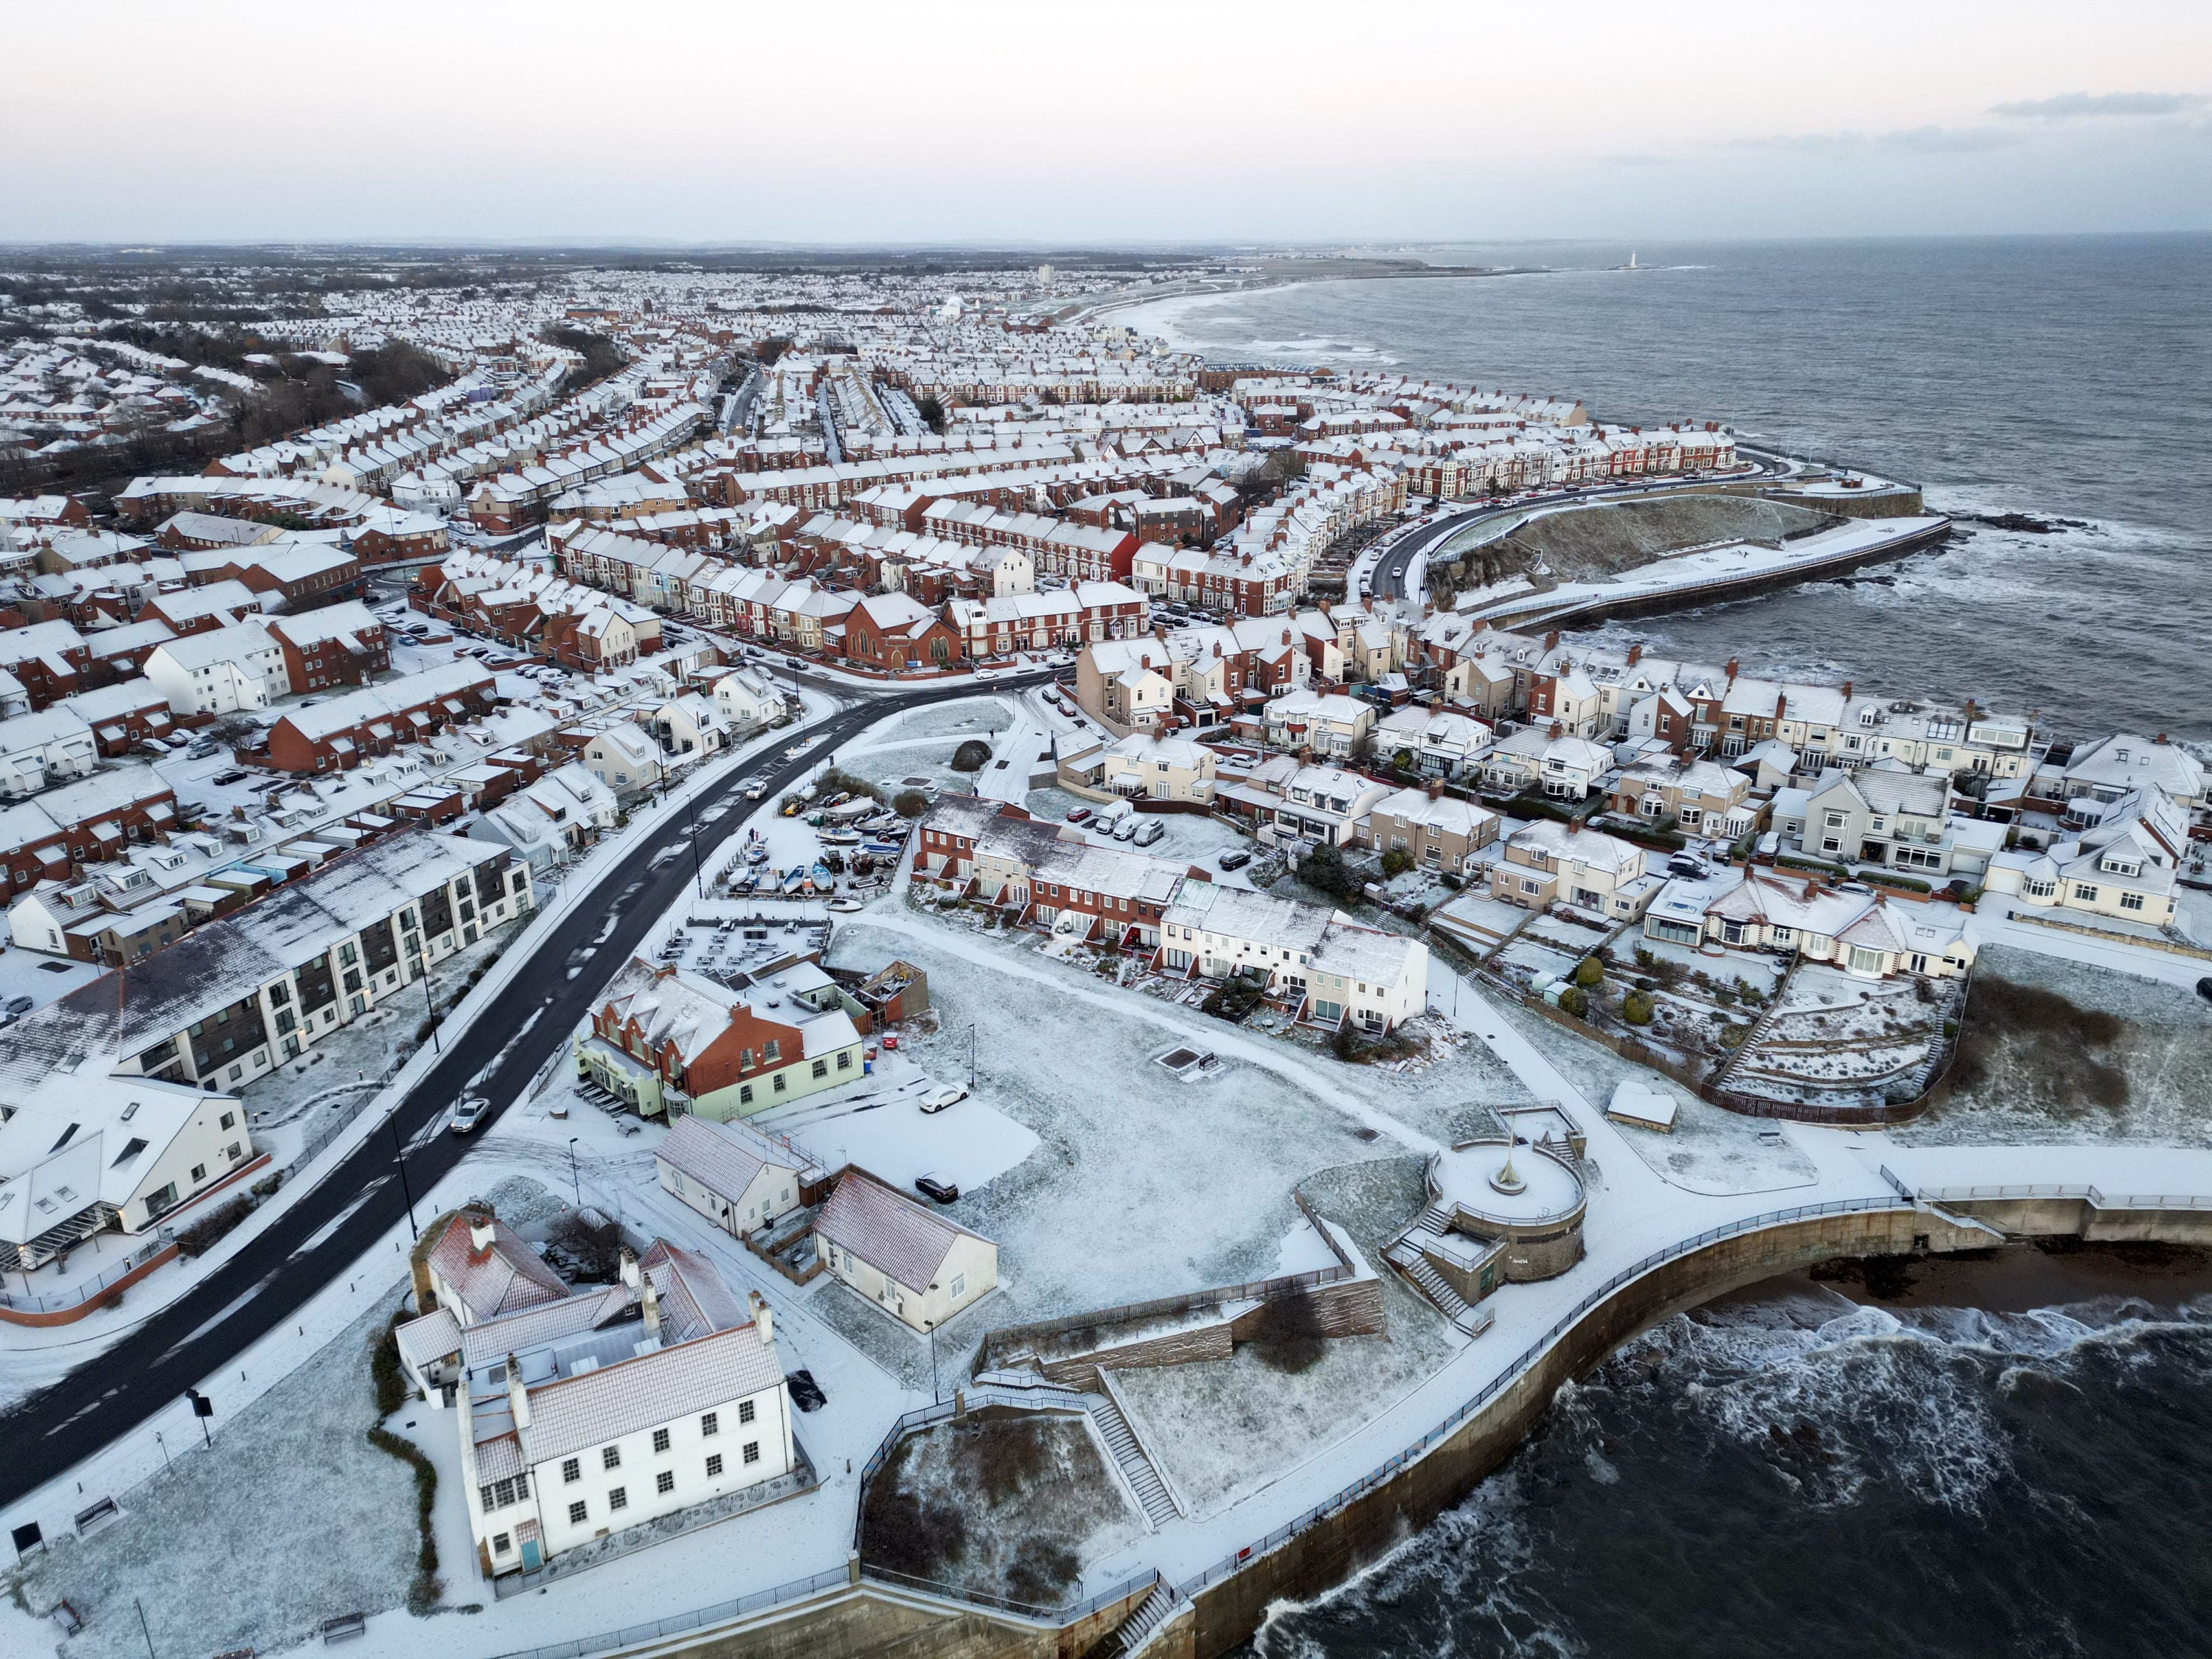 Overnight snow at Cullercoats Bay in North Tyneside